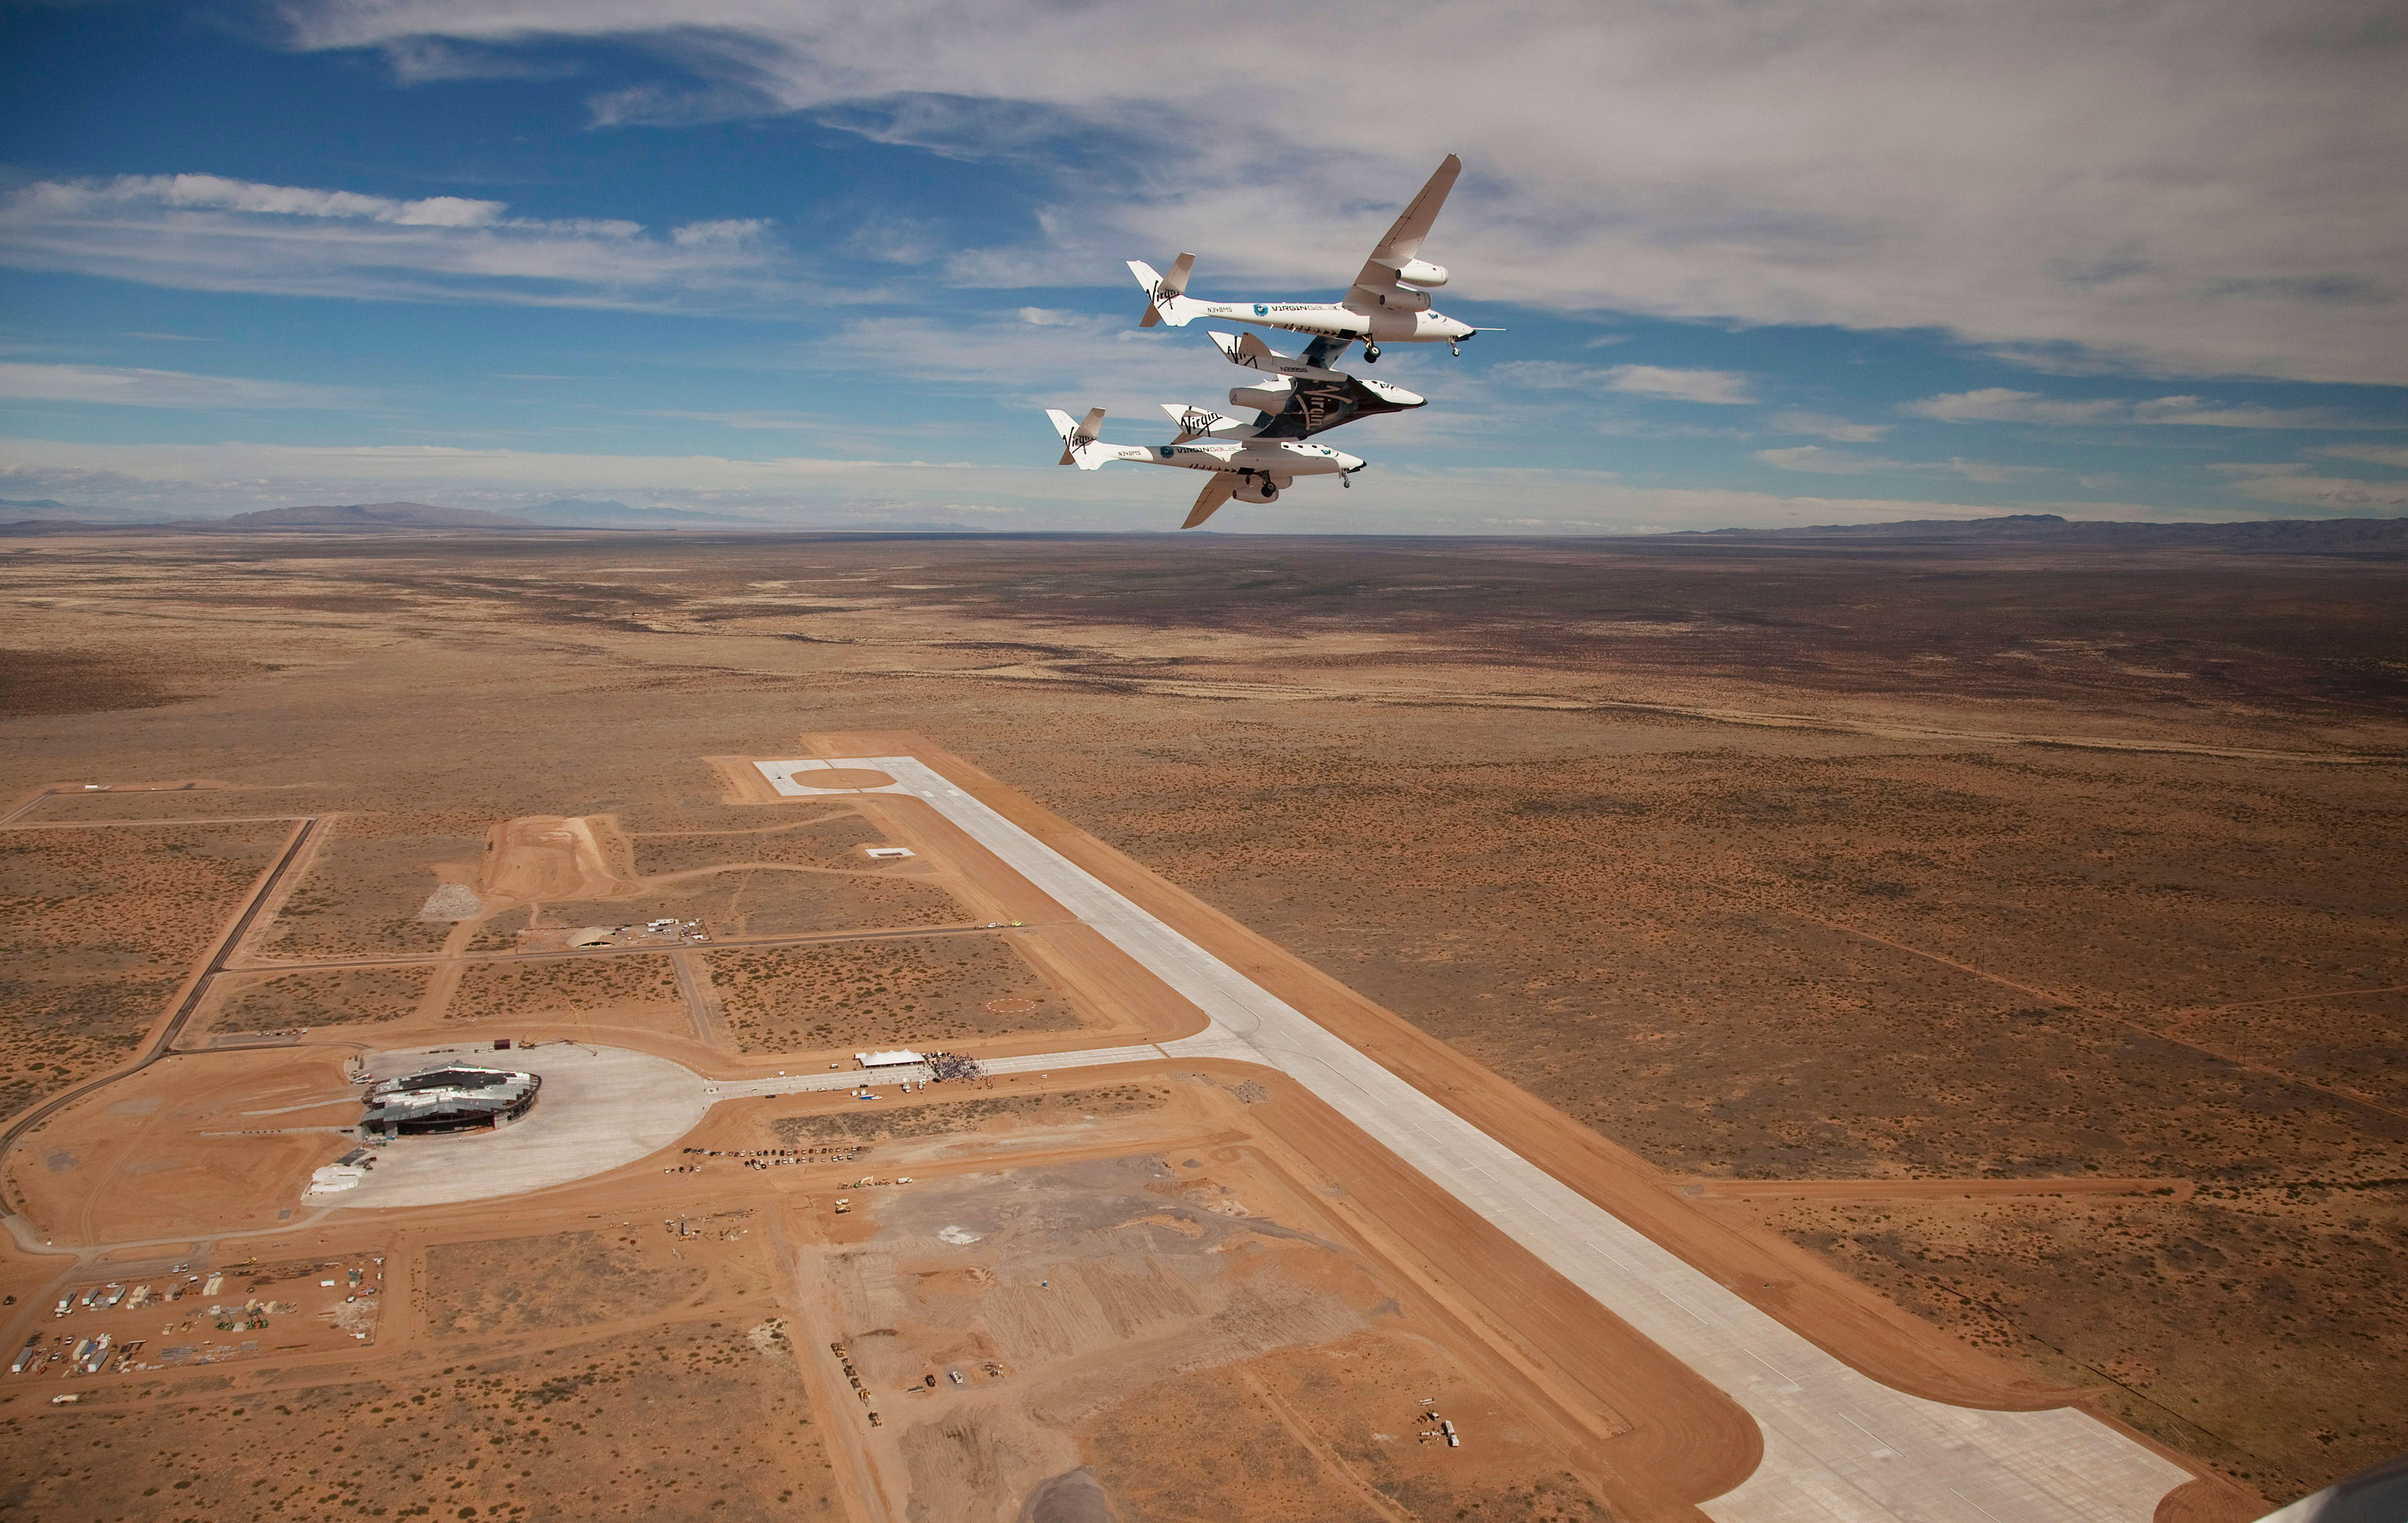 Virgin Galactic’s WhiteKnight2 and SpaceShipTwo soar above the runway at the New Mexico Spaceport. Credit: NMSA/Mark Greenberg